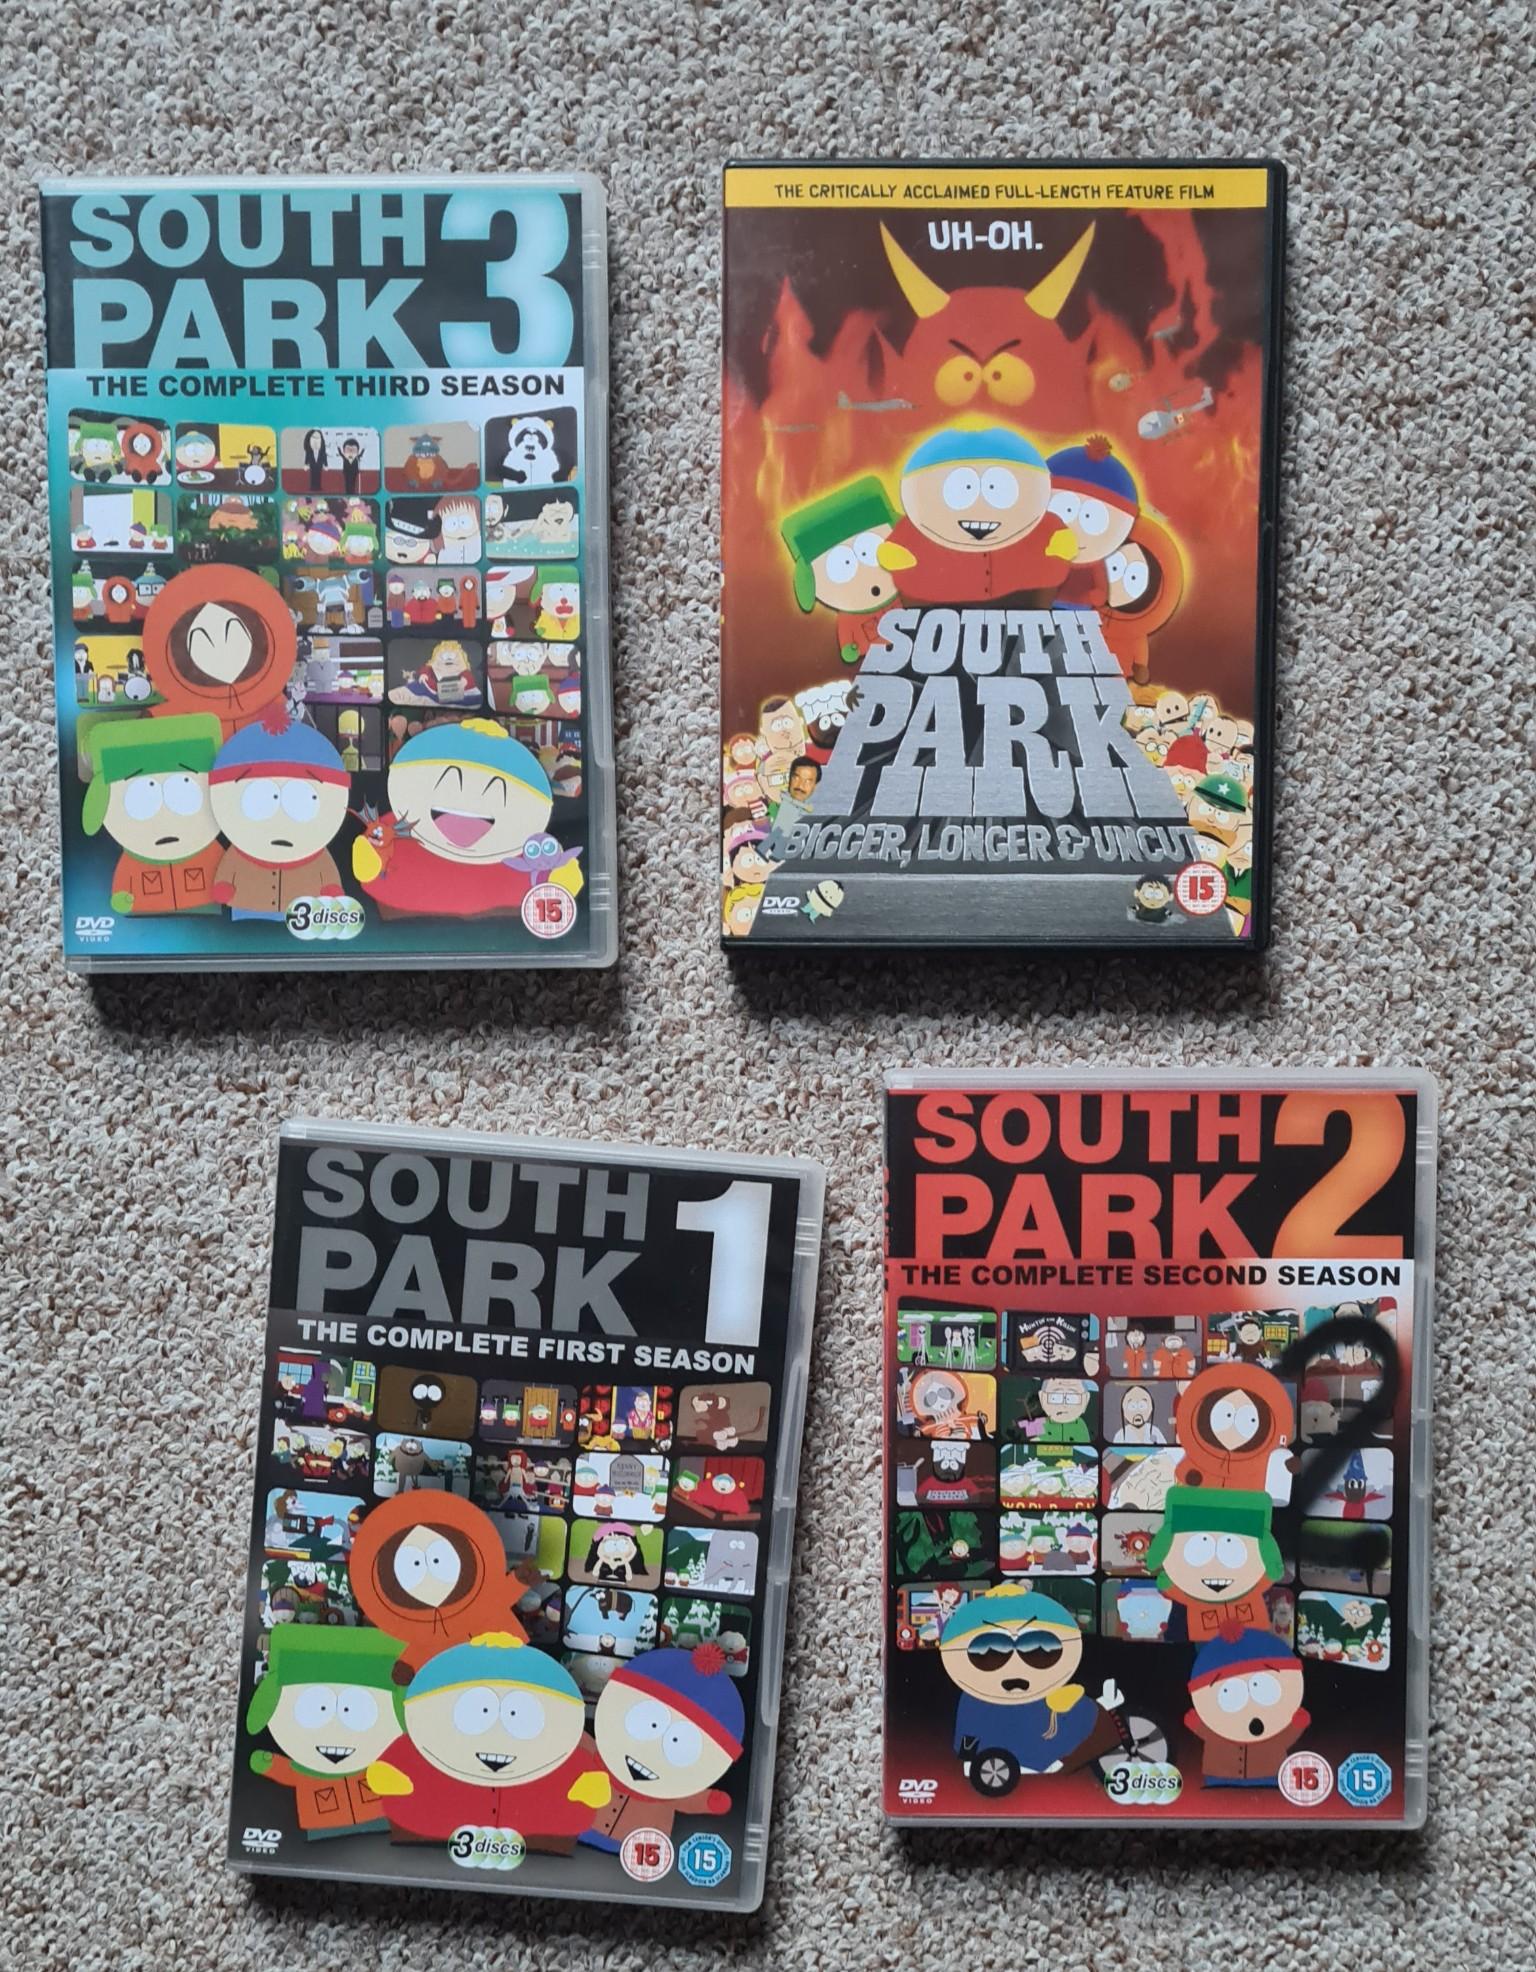 South Park DVD Collection